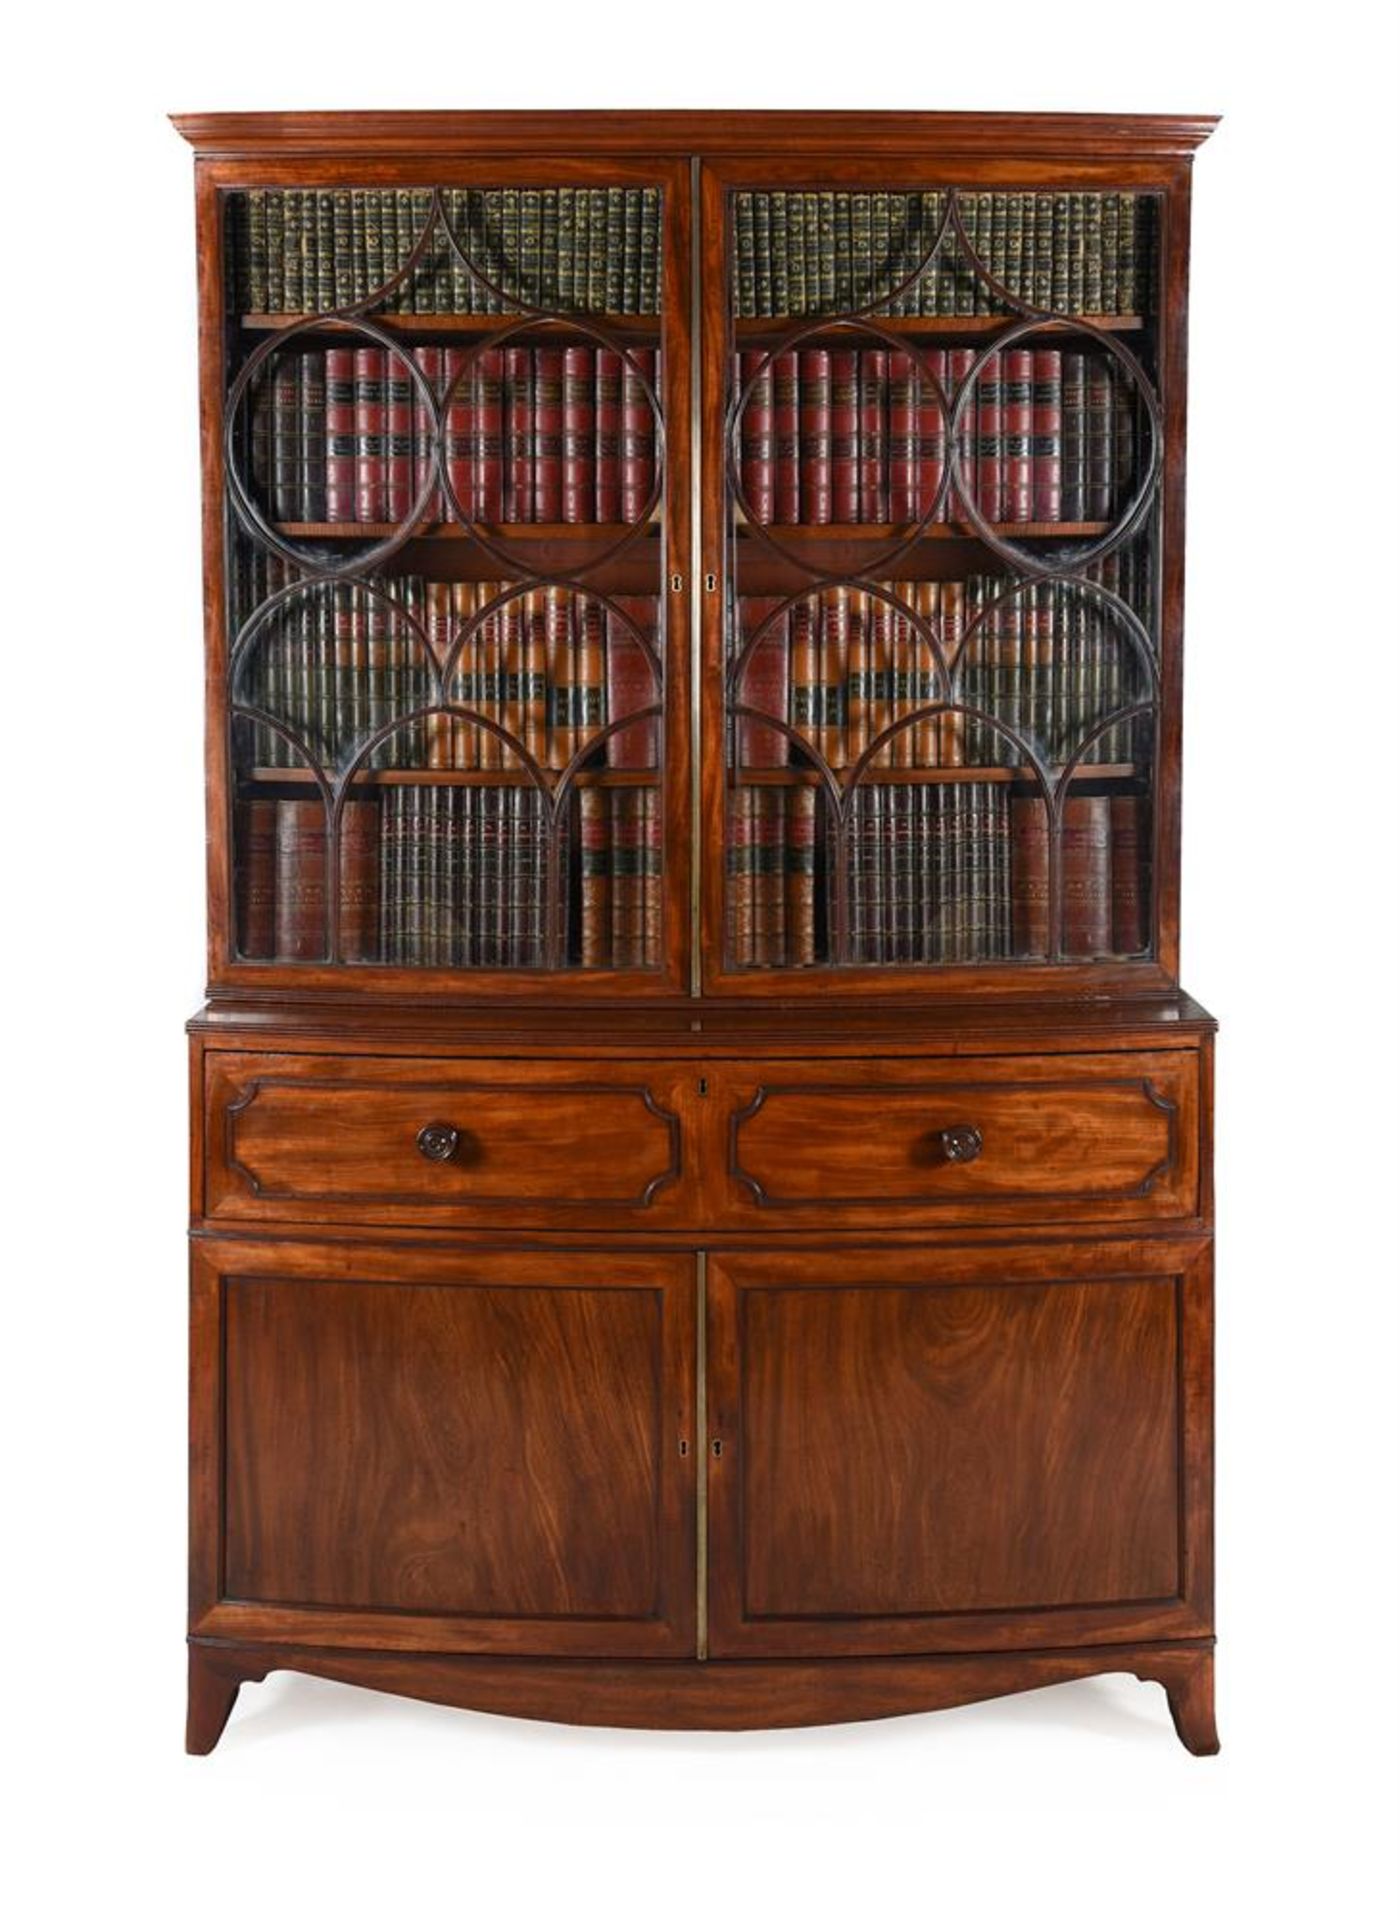 Y A REGENCY MAHOGANY BOWFRONT SECRETAIRE BOOKCASE, IN THE MANNER OF GILLOWS, CIRCA 1820